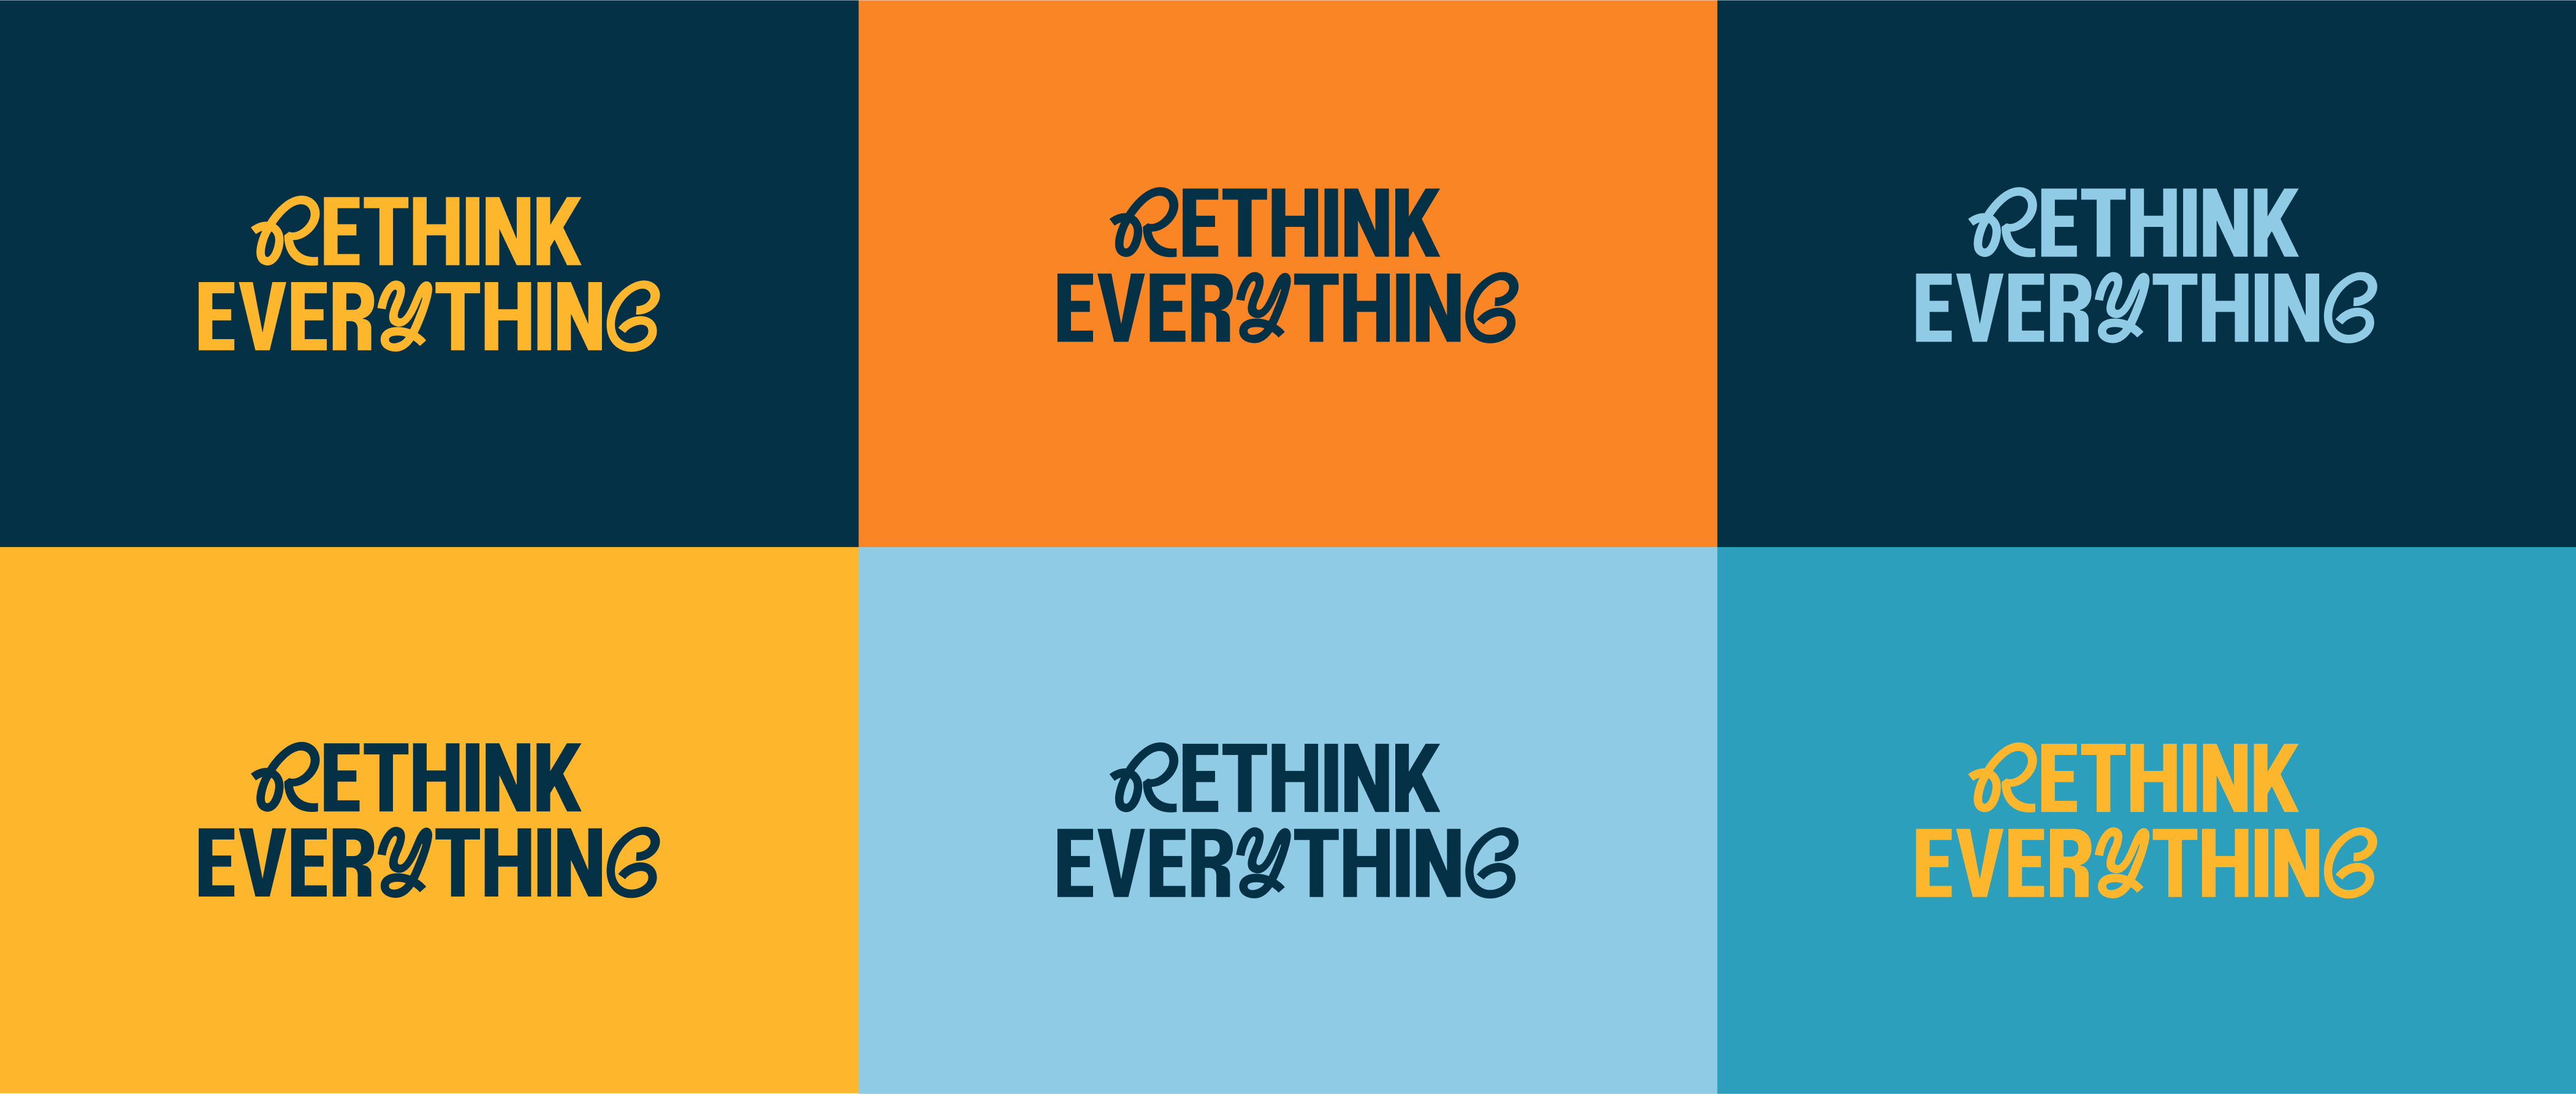 rethink everything colors